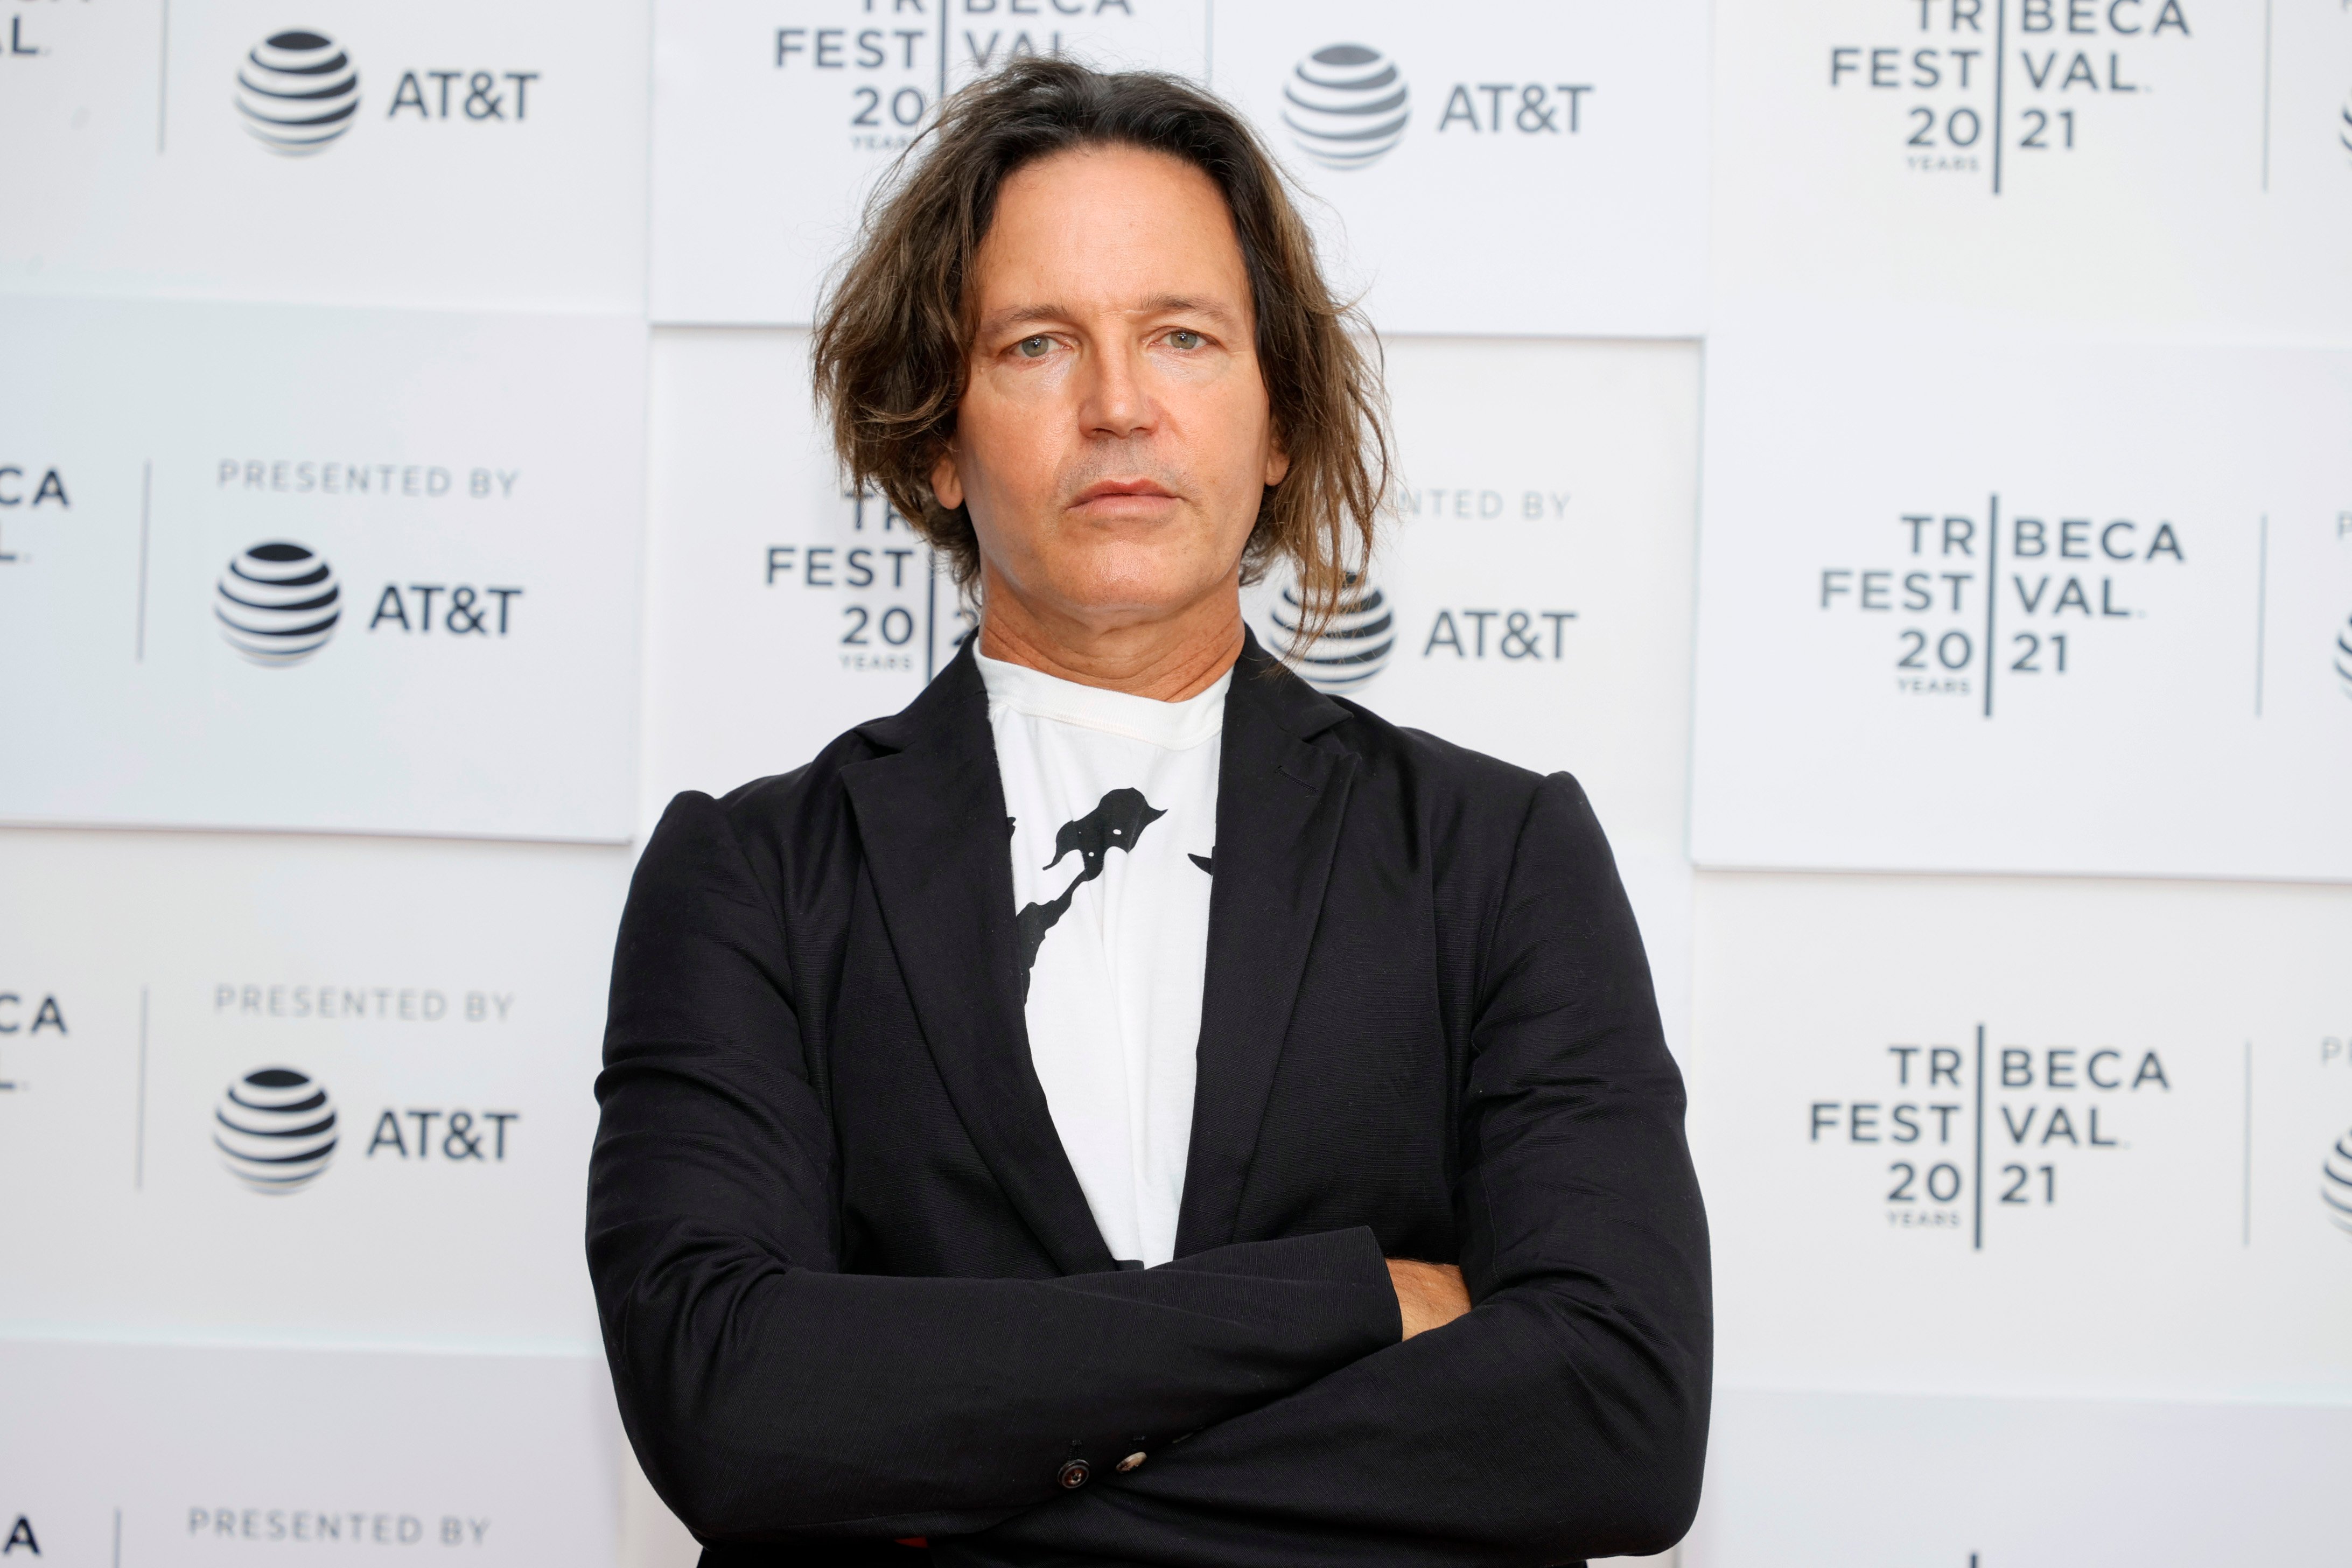 Third Eye Blind frontman Stephan Jenkins at a Tribeca Festival event in 2021